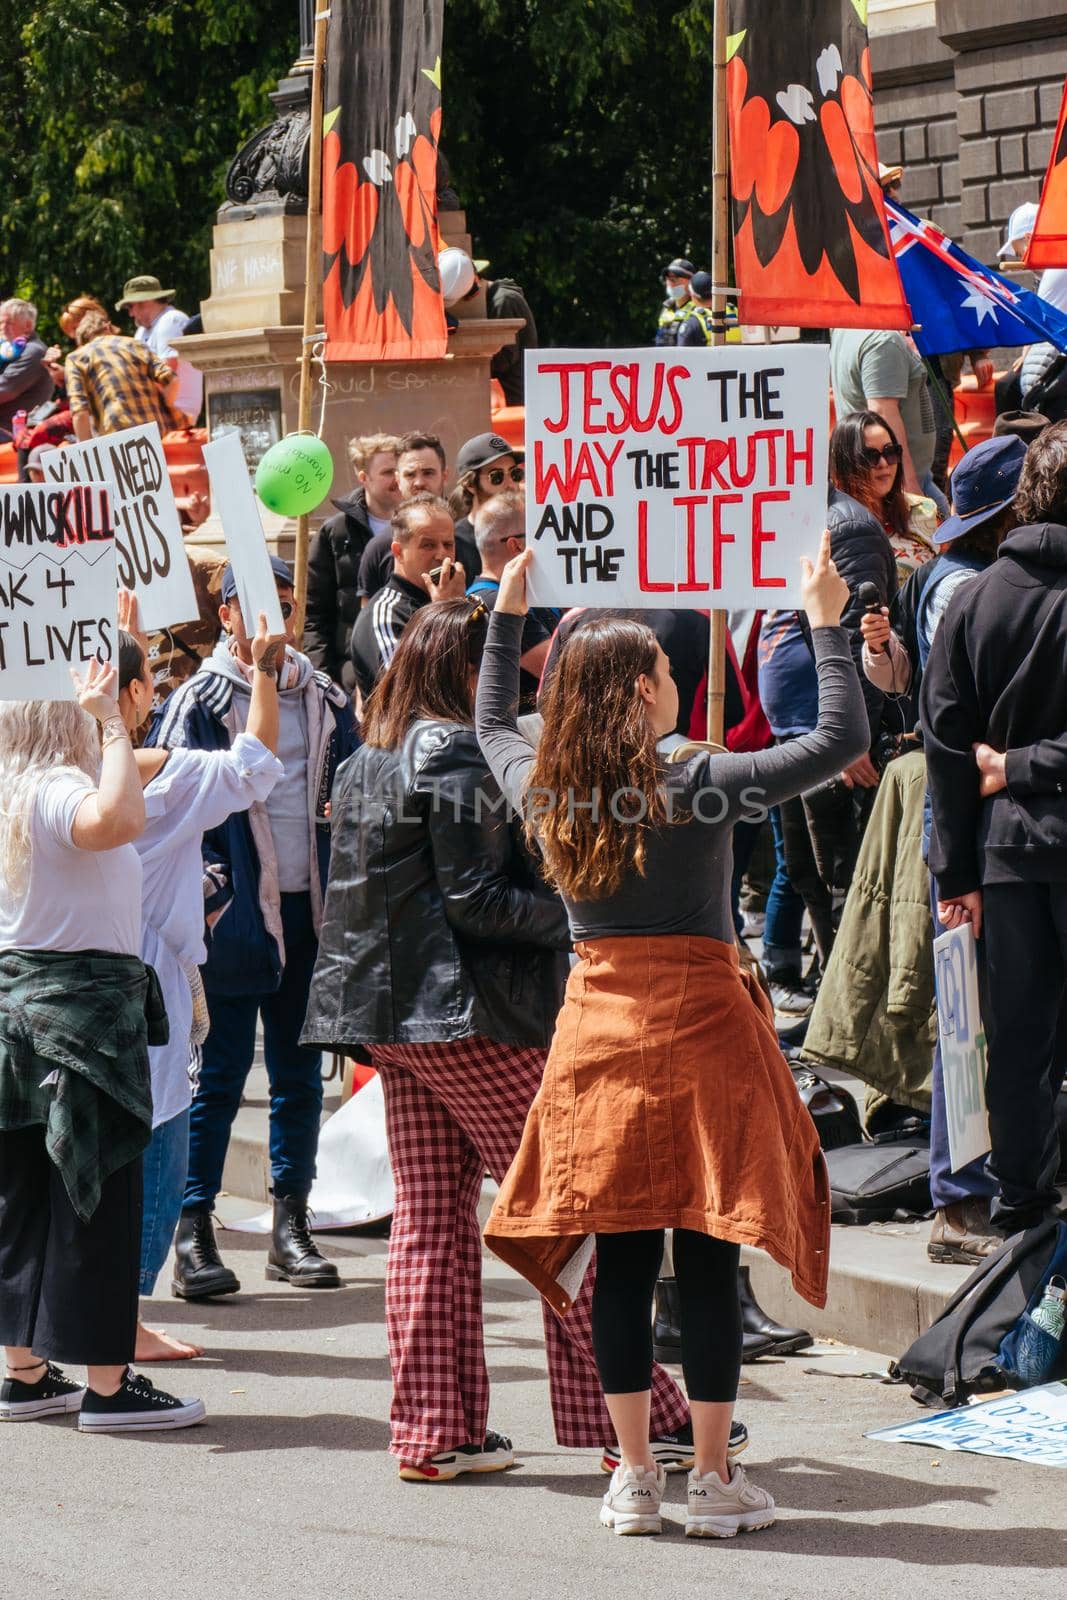 Melbourne, Australia - November 20, 2021: Protesters opposing the Pandemic Legislation being tabled in the Victorian Parliament on November 20, 2021 in Melbourne, Australia.